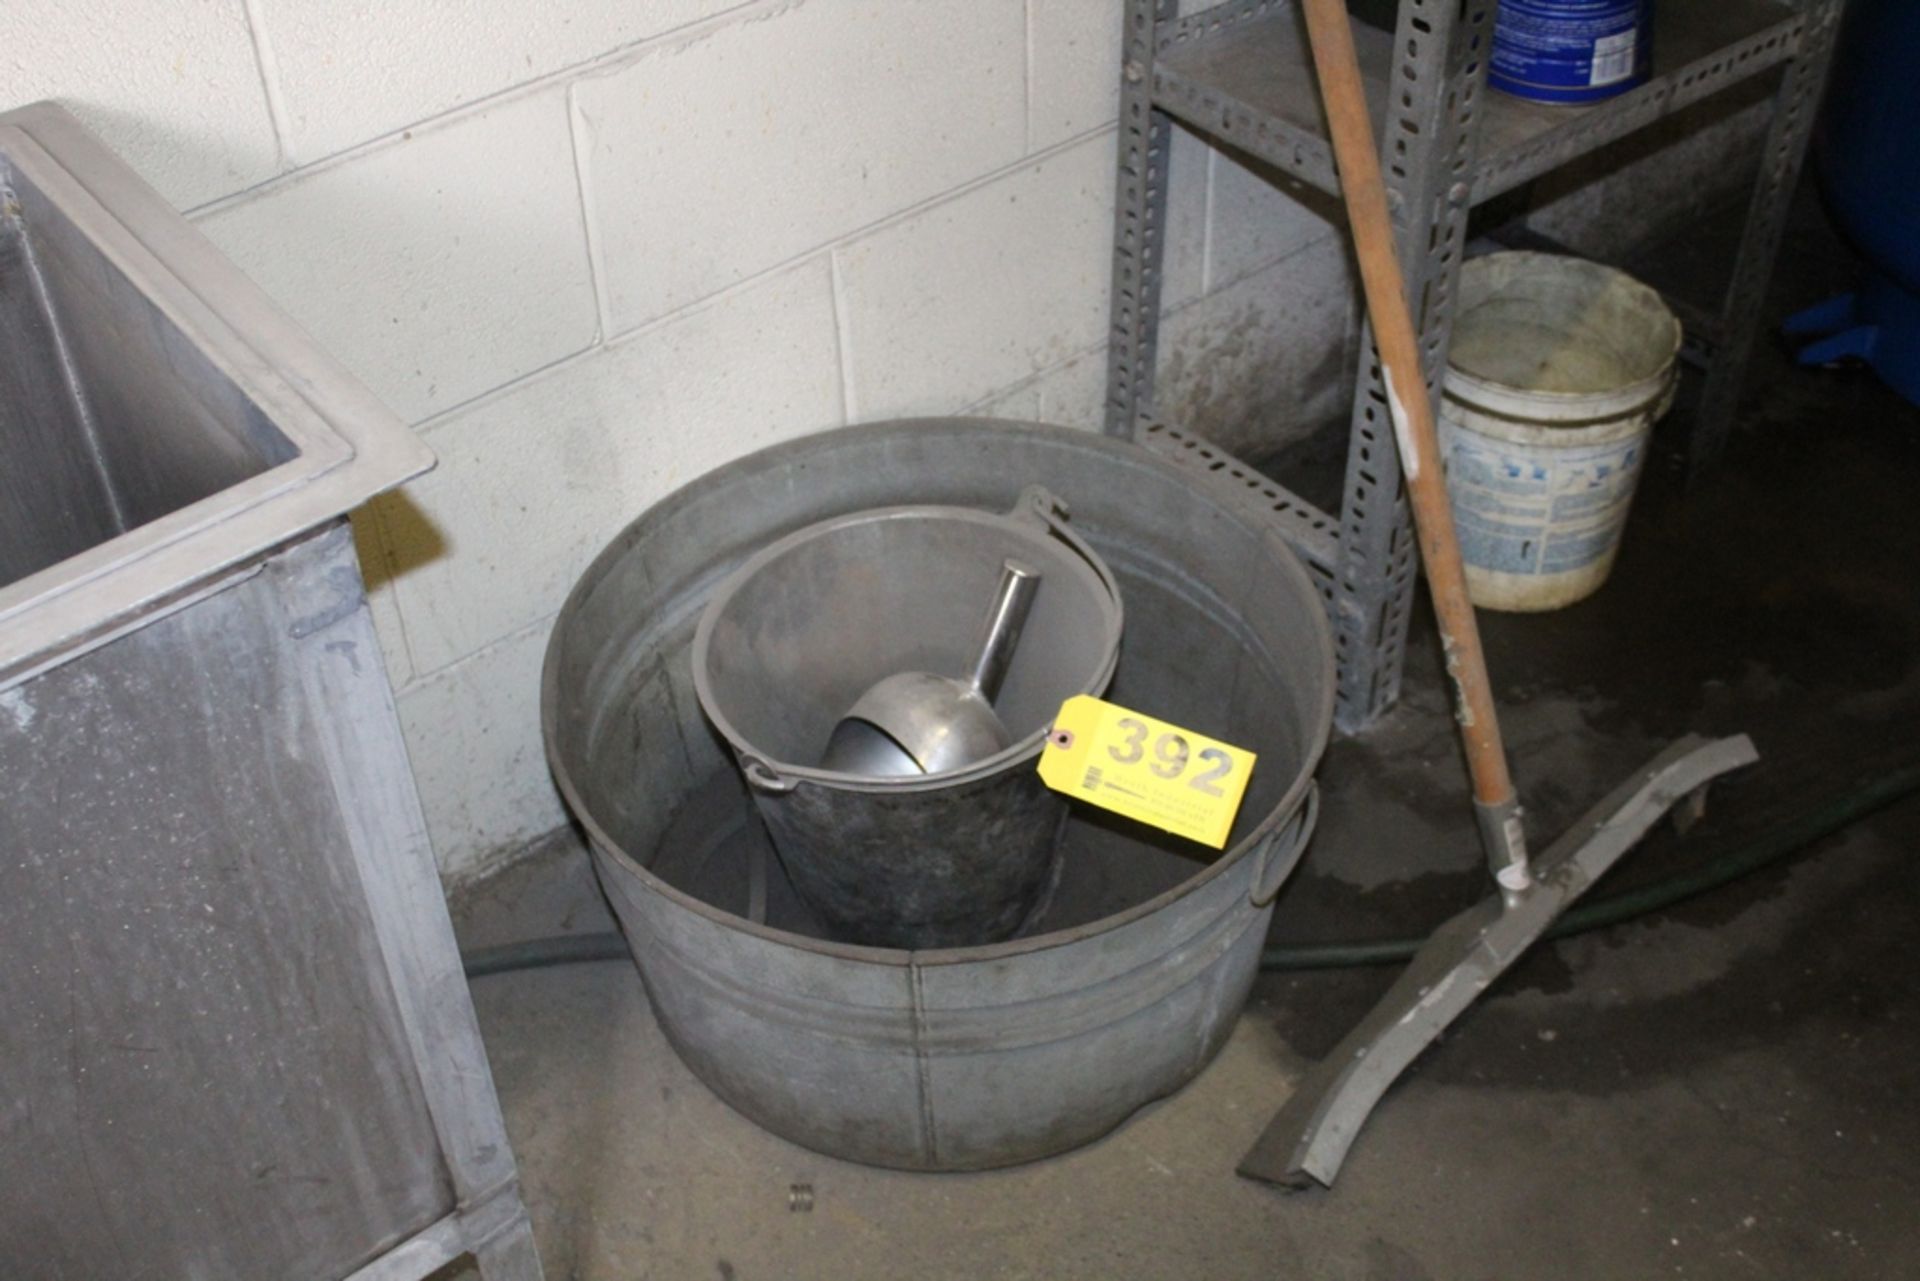 WASH TUB, STAINLESS STEEL BUCKET, AND SCOOP